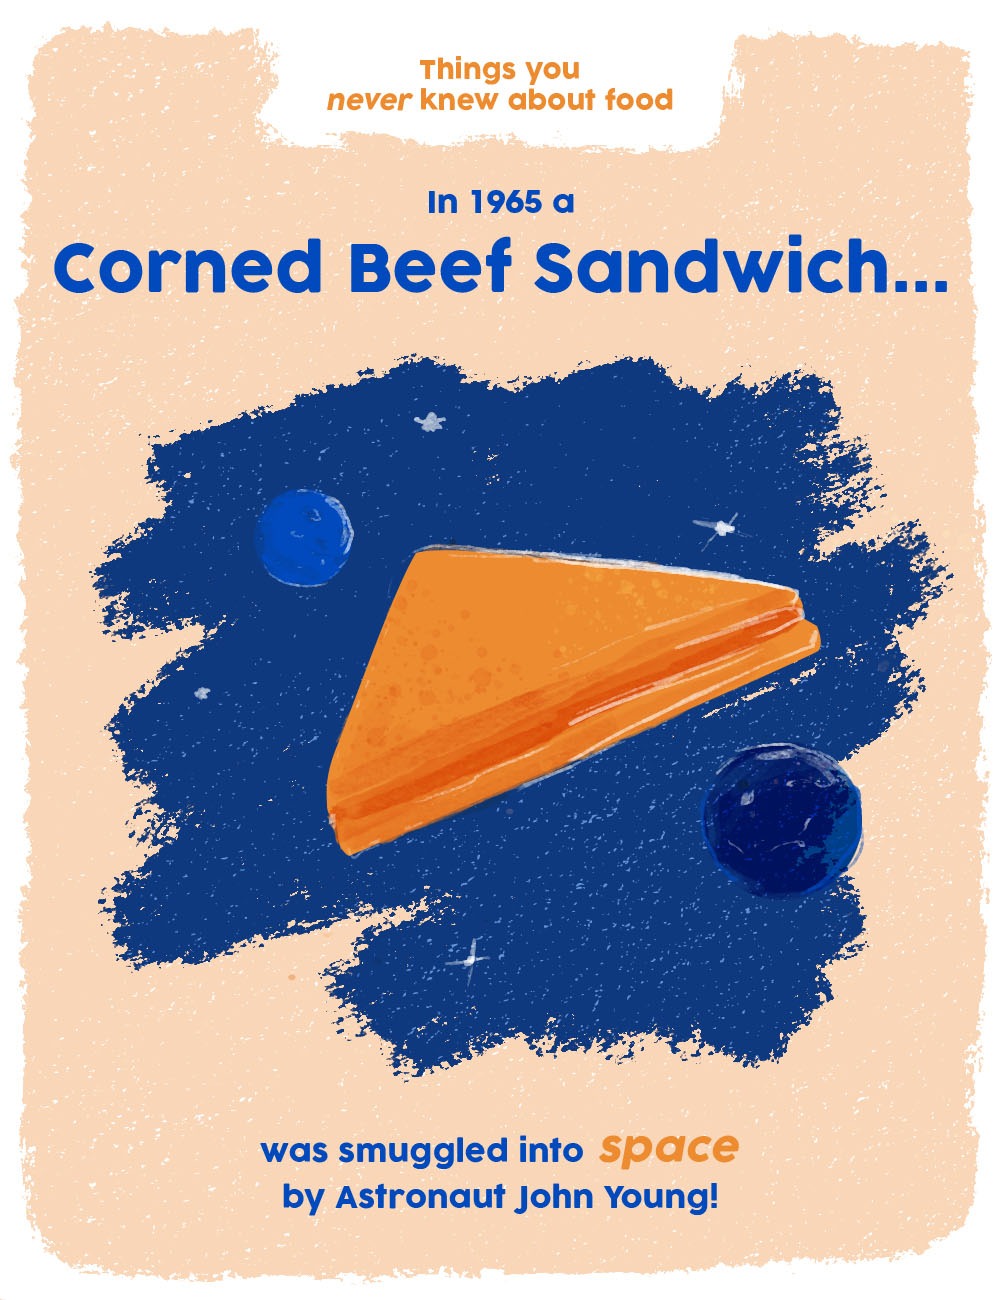 things you never knew about food graphics - corned beef sandwich in space